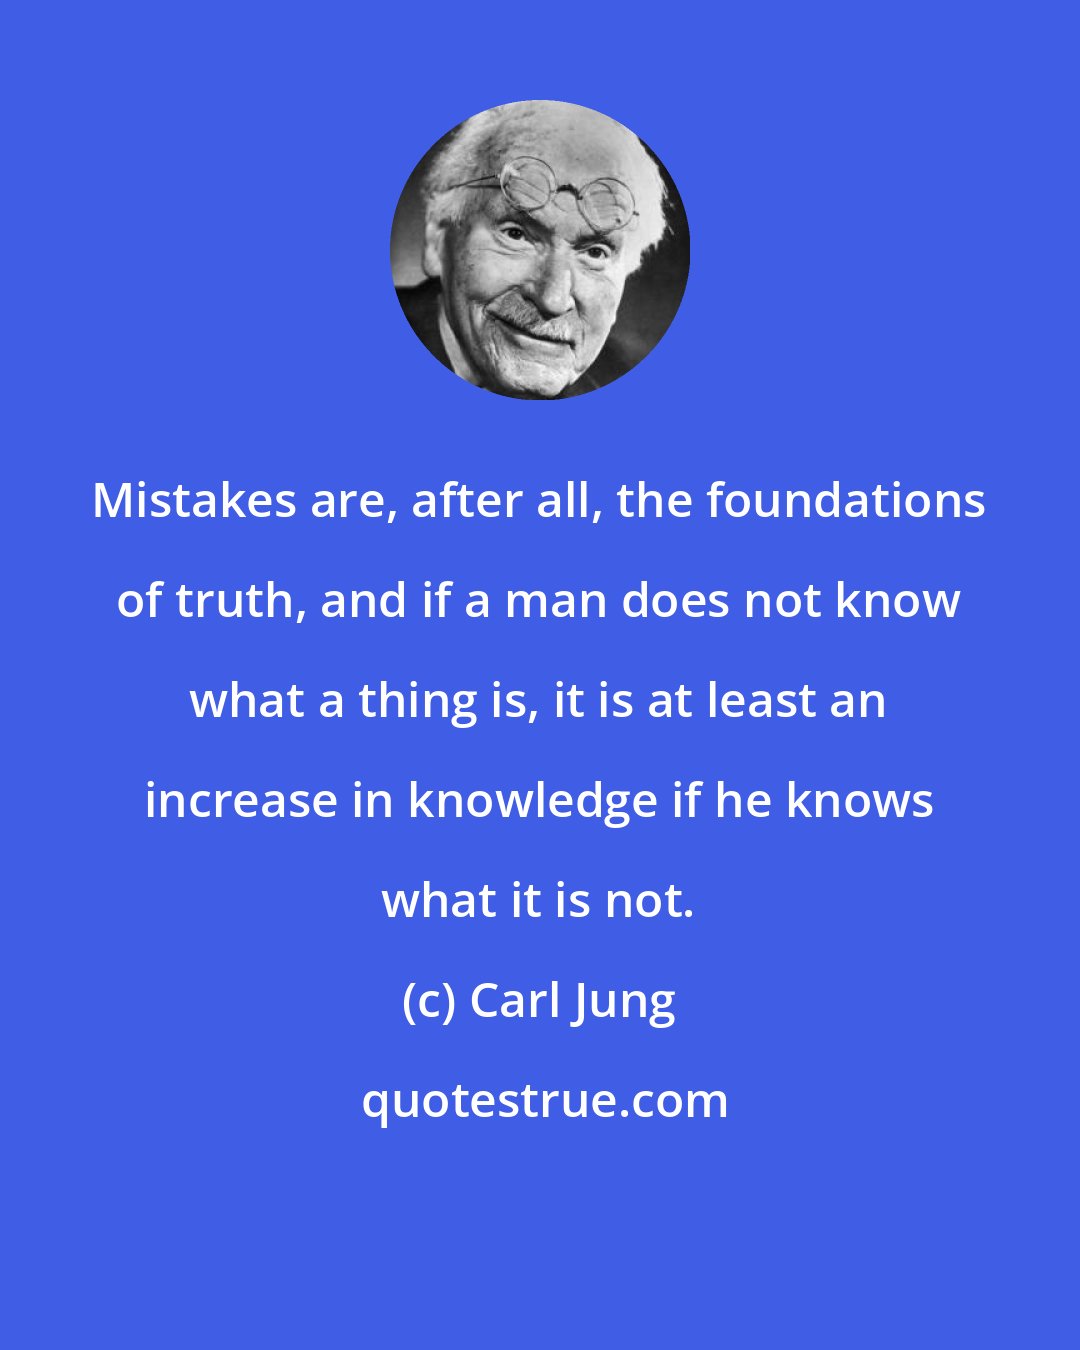 Carl Jung: Mistakes are, after all, the foundations of truth, and if a man does not know what a thing is, it is at least an increase in knowledge if he knows what it is not.